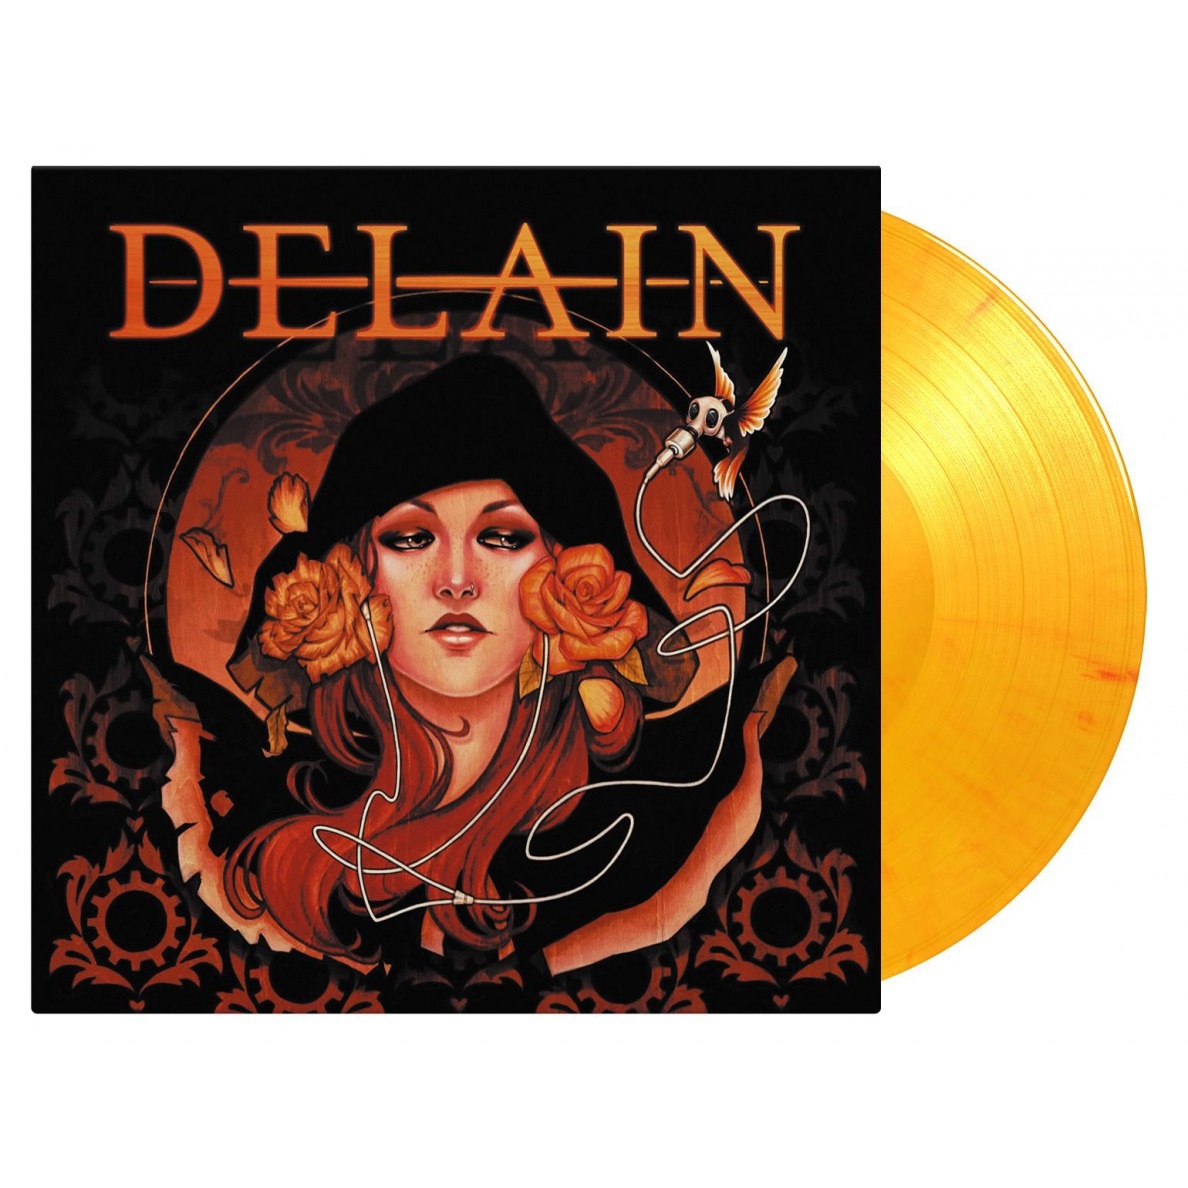 Delain (델라인) - We Are The Others [플레이밍 컬러 LP] 